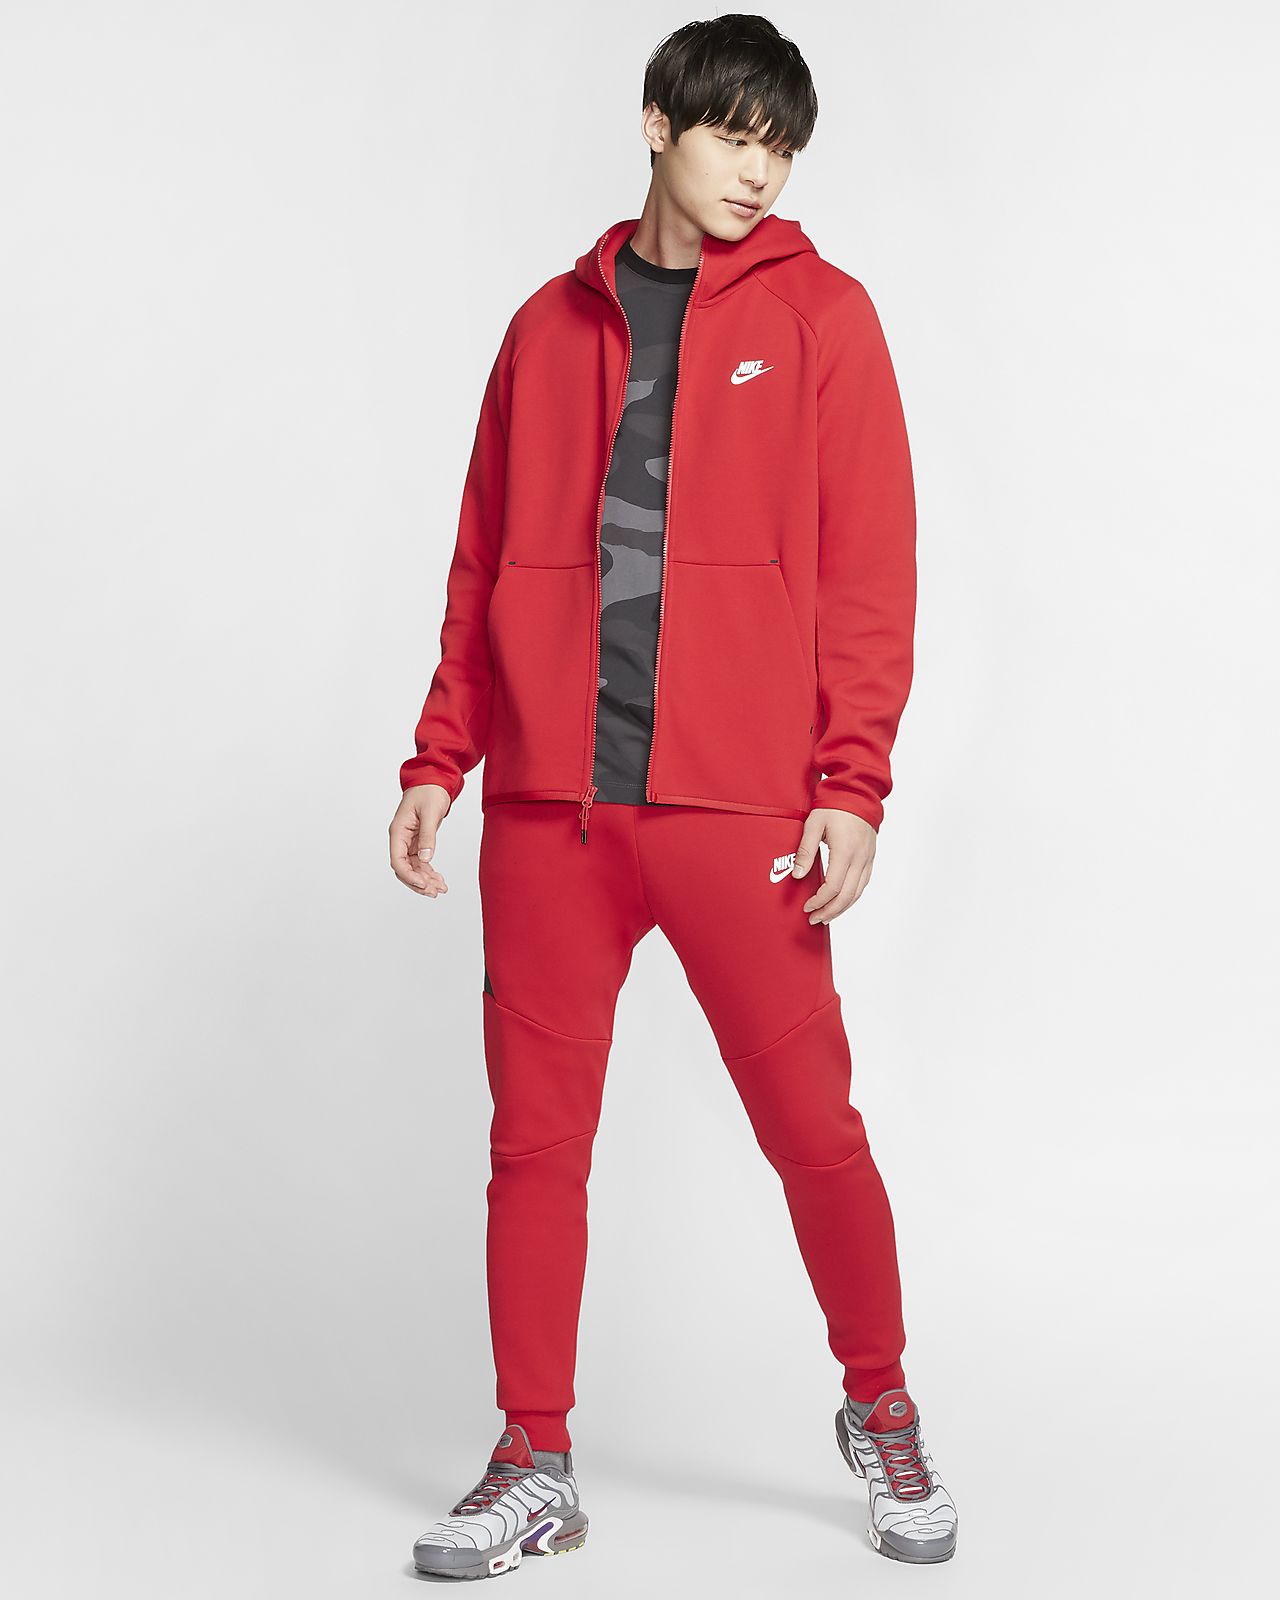 all red nike tech suit